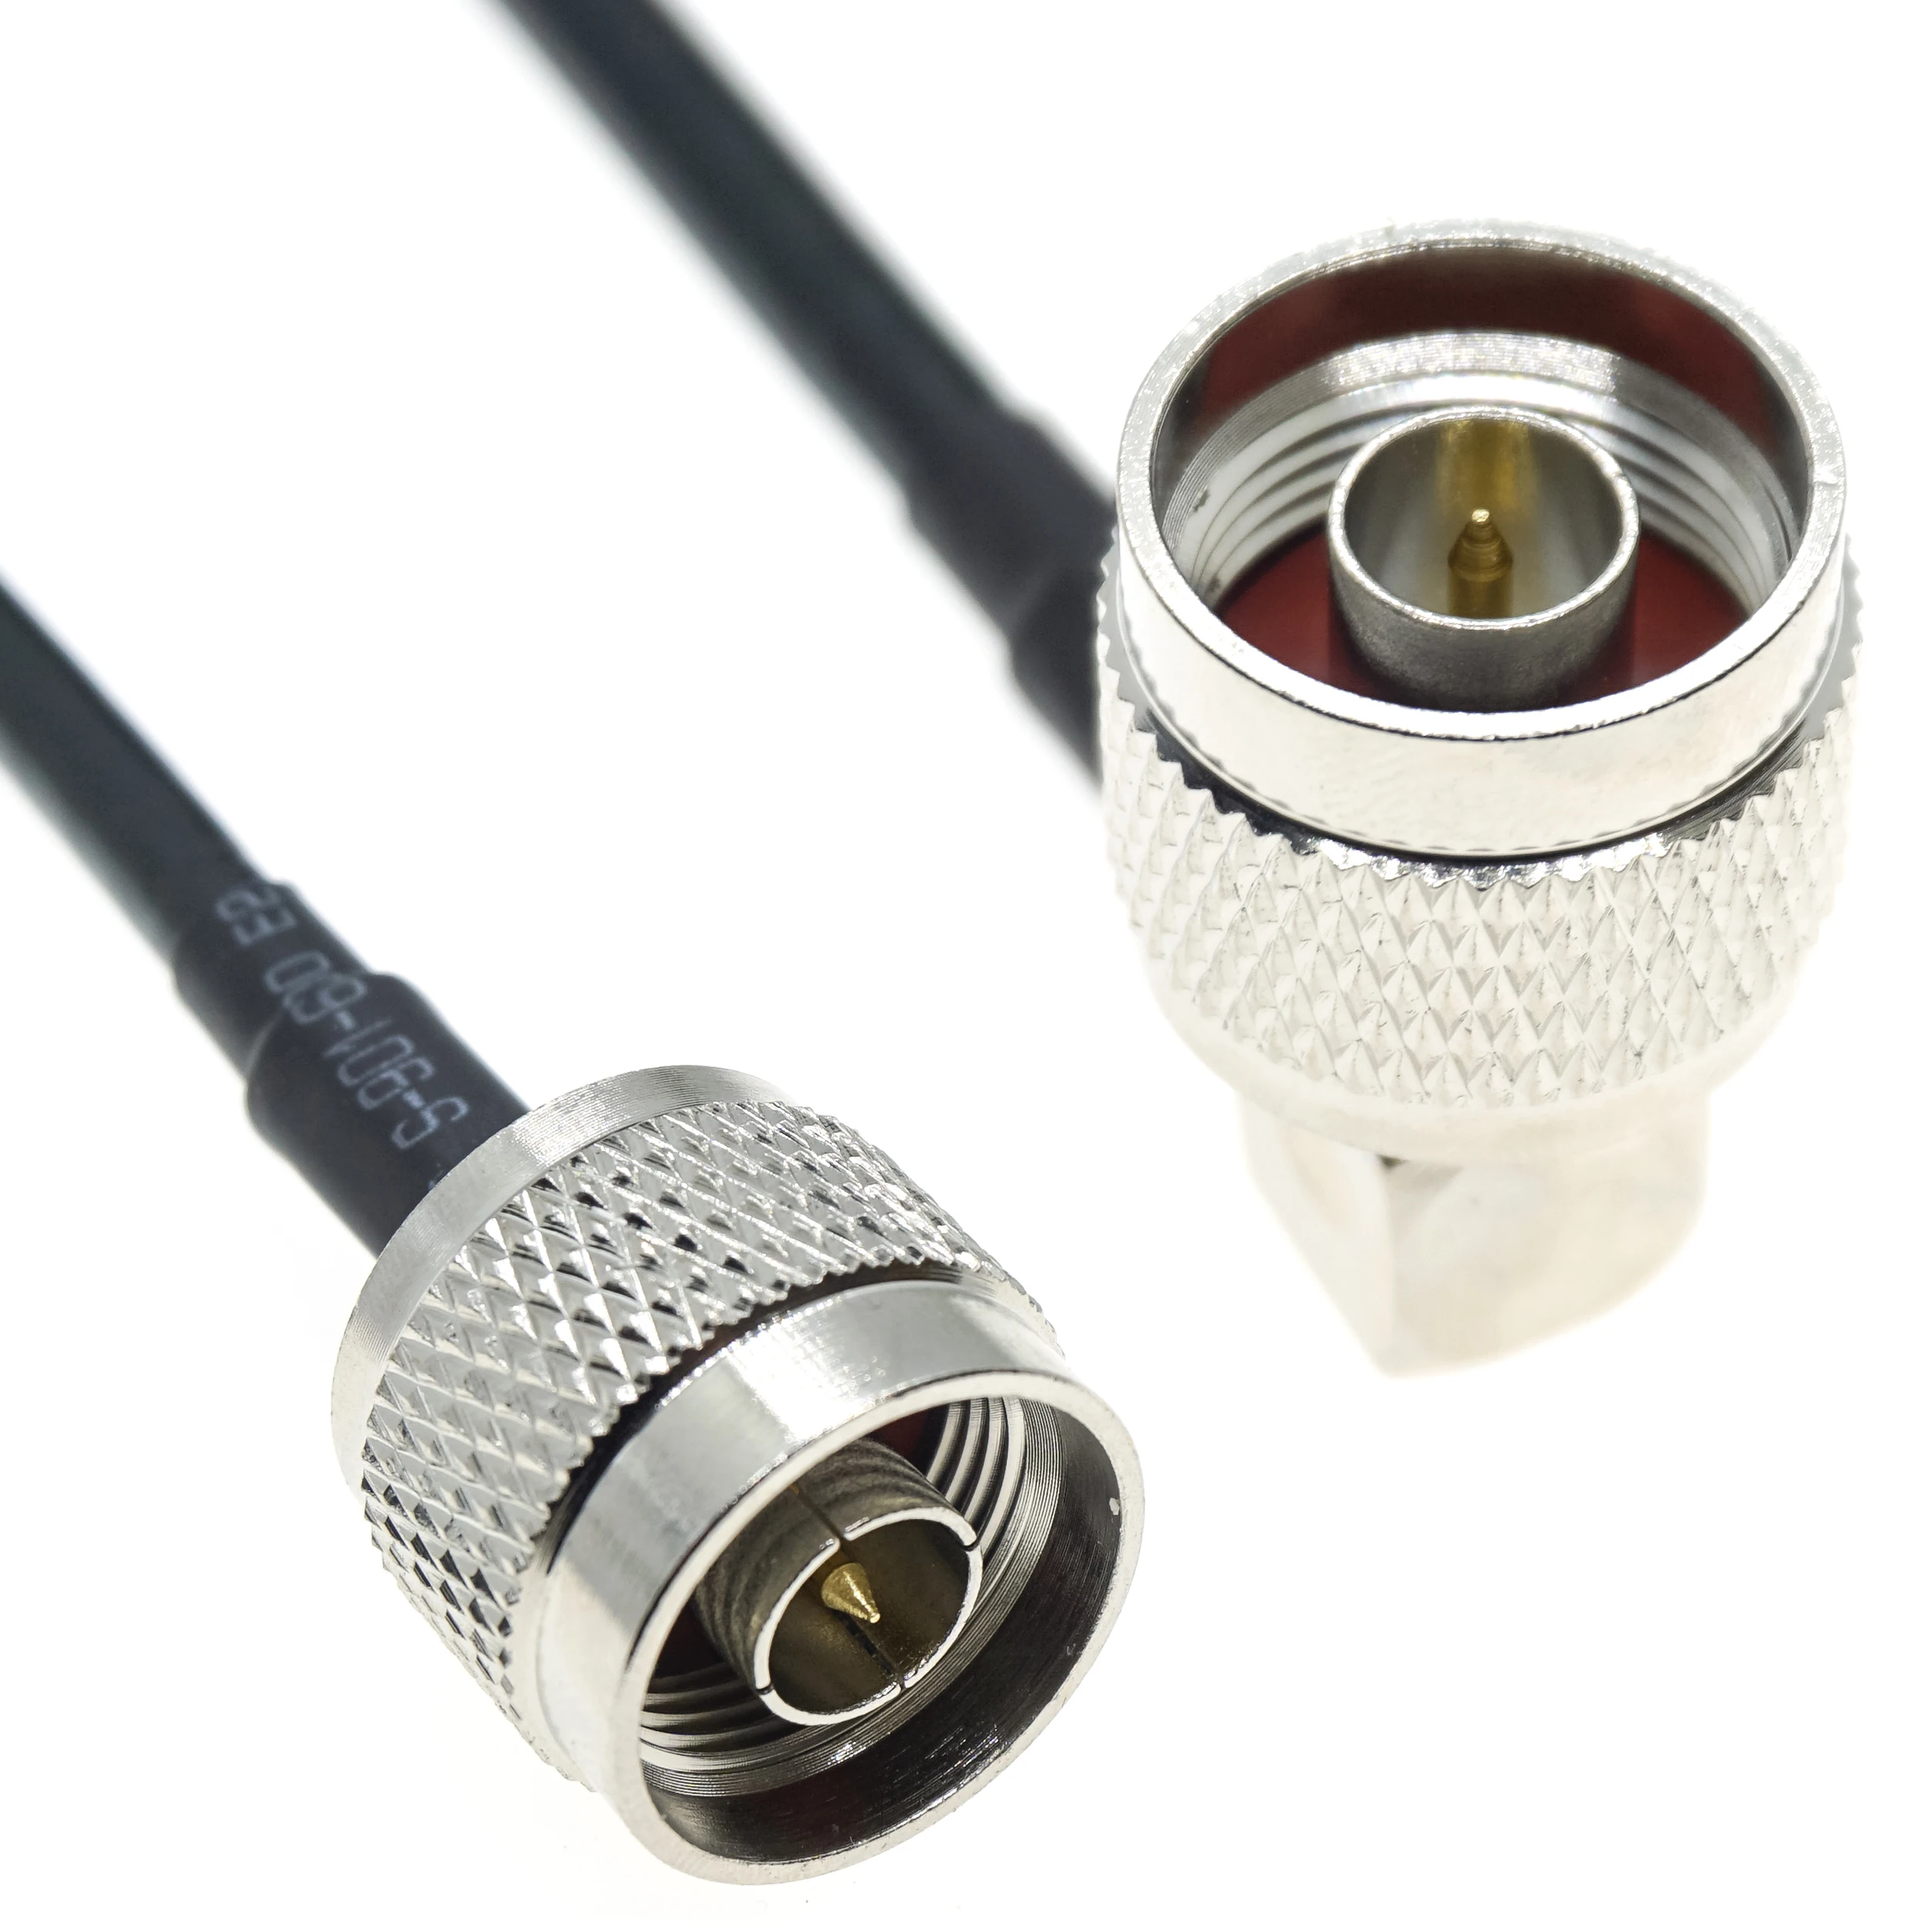 

20cm 30cm 50cm 75cm 100cm 1M 2M 3M RG58 N male To N male Right angle Connector 50-3 RF Coaxial Coax Cable 50ohm Jumper